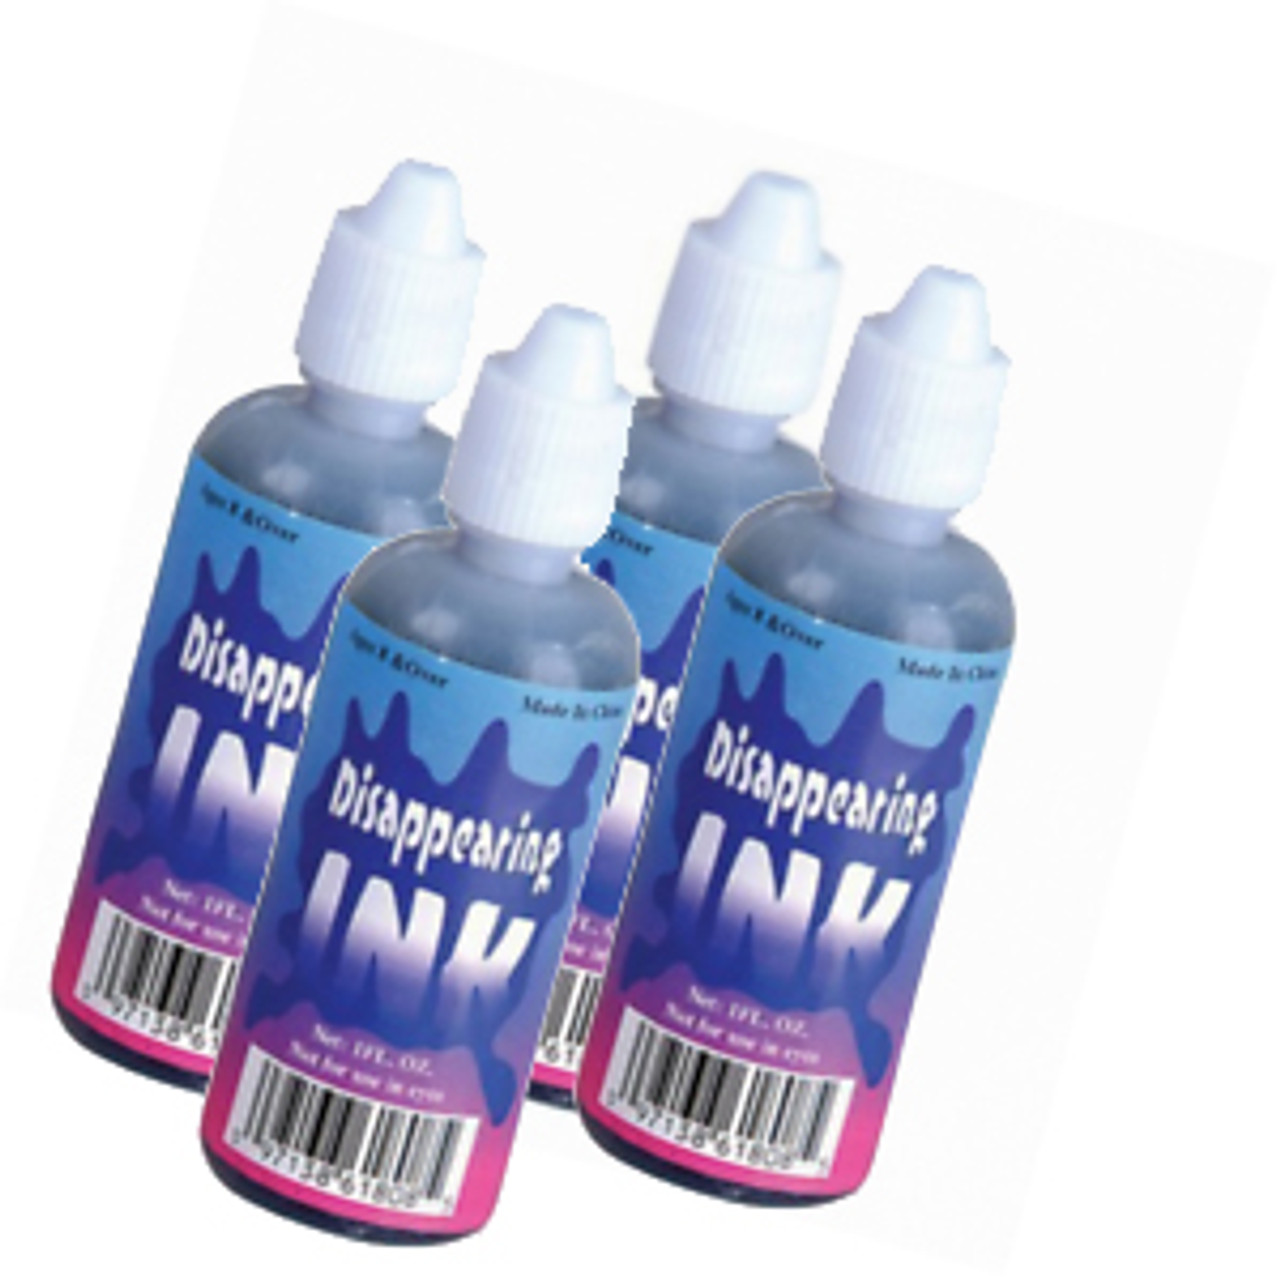 Invisible Ink (Set of 4) - International Spy Museum Store